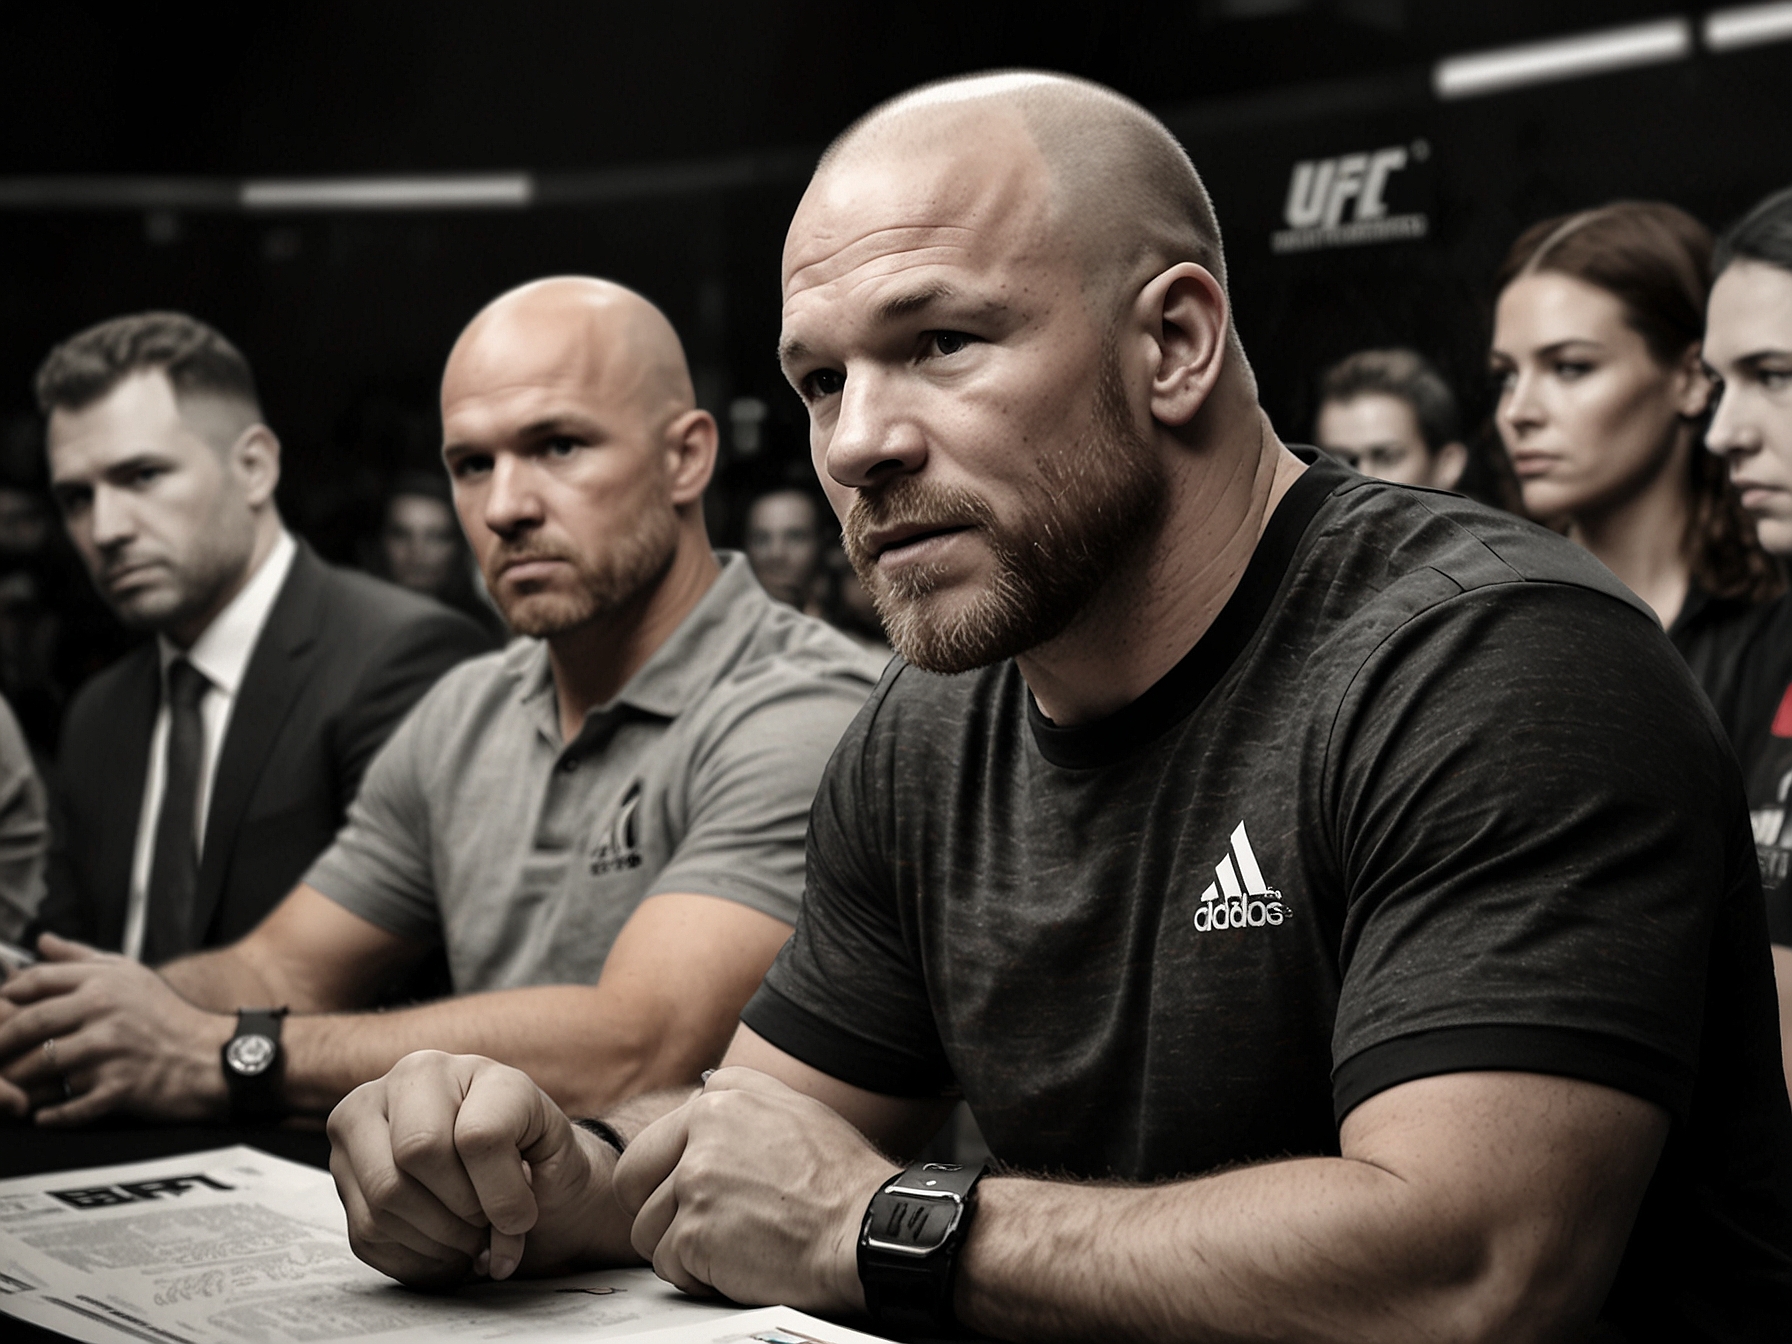 Dana White at a press conference announcing the Adesanya vs. Du Plessis fight, highlighting the excitement and anticipation surrounding this major UFC event.